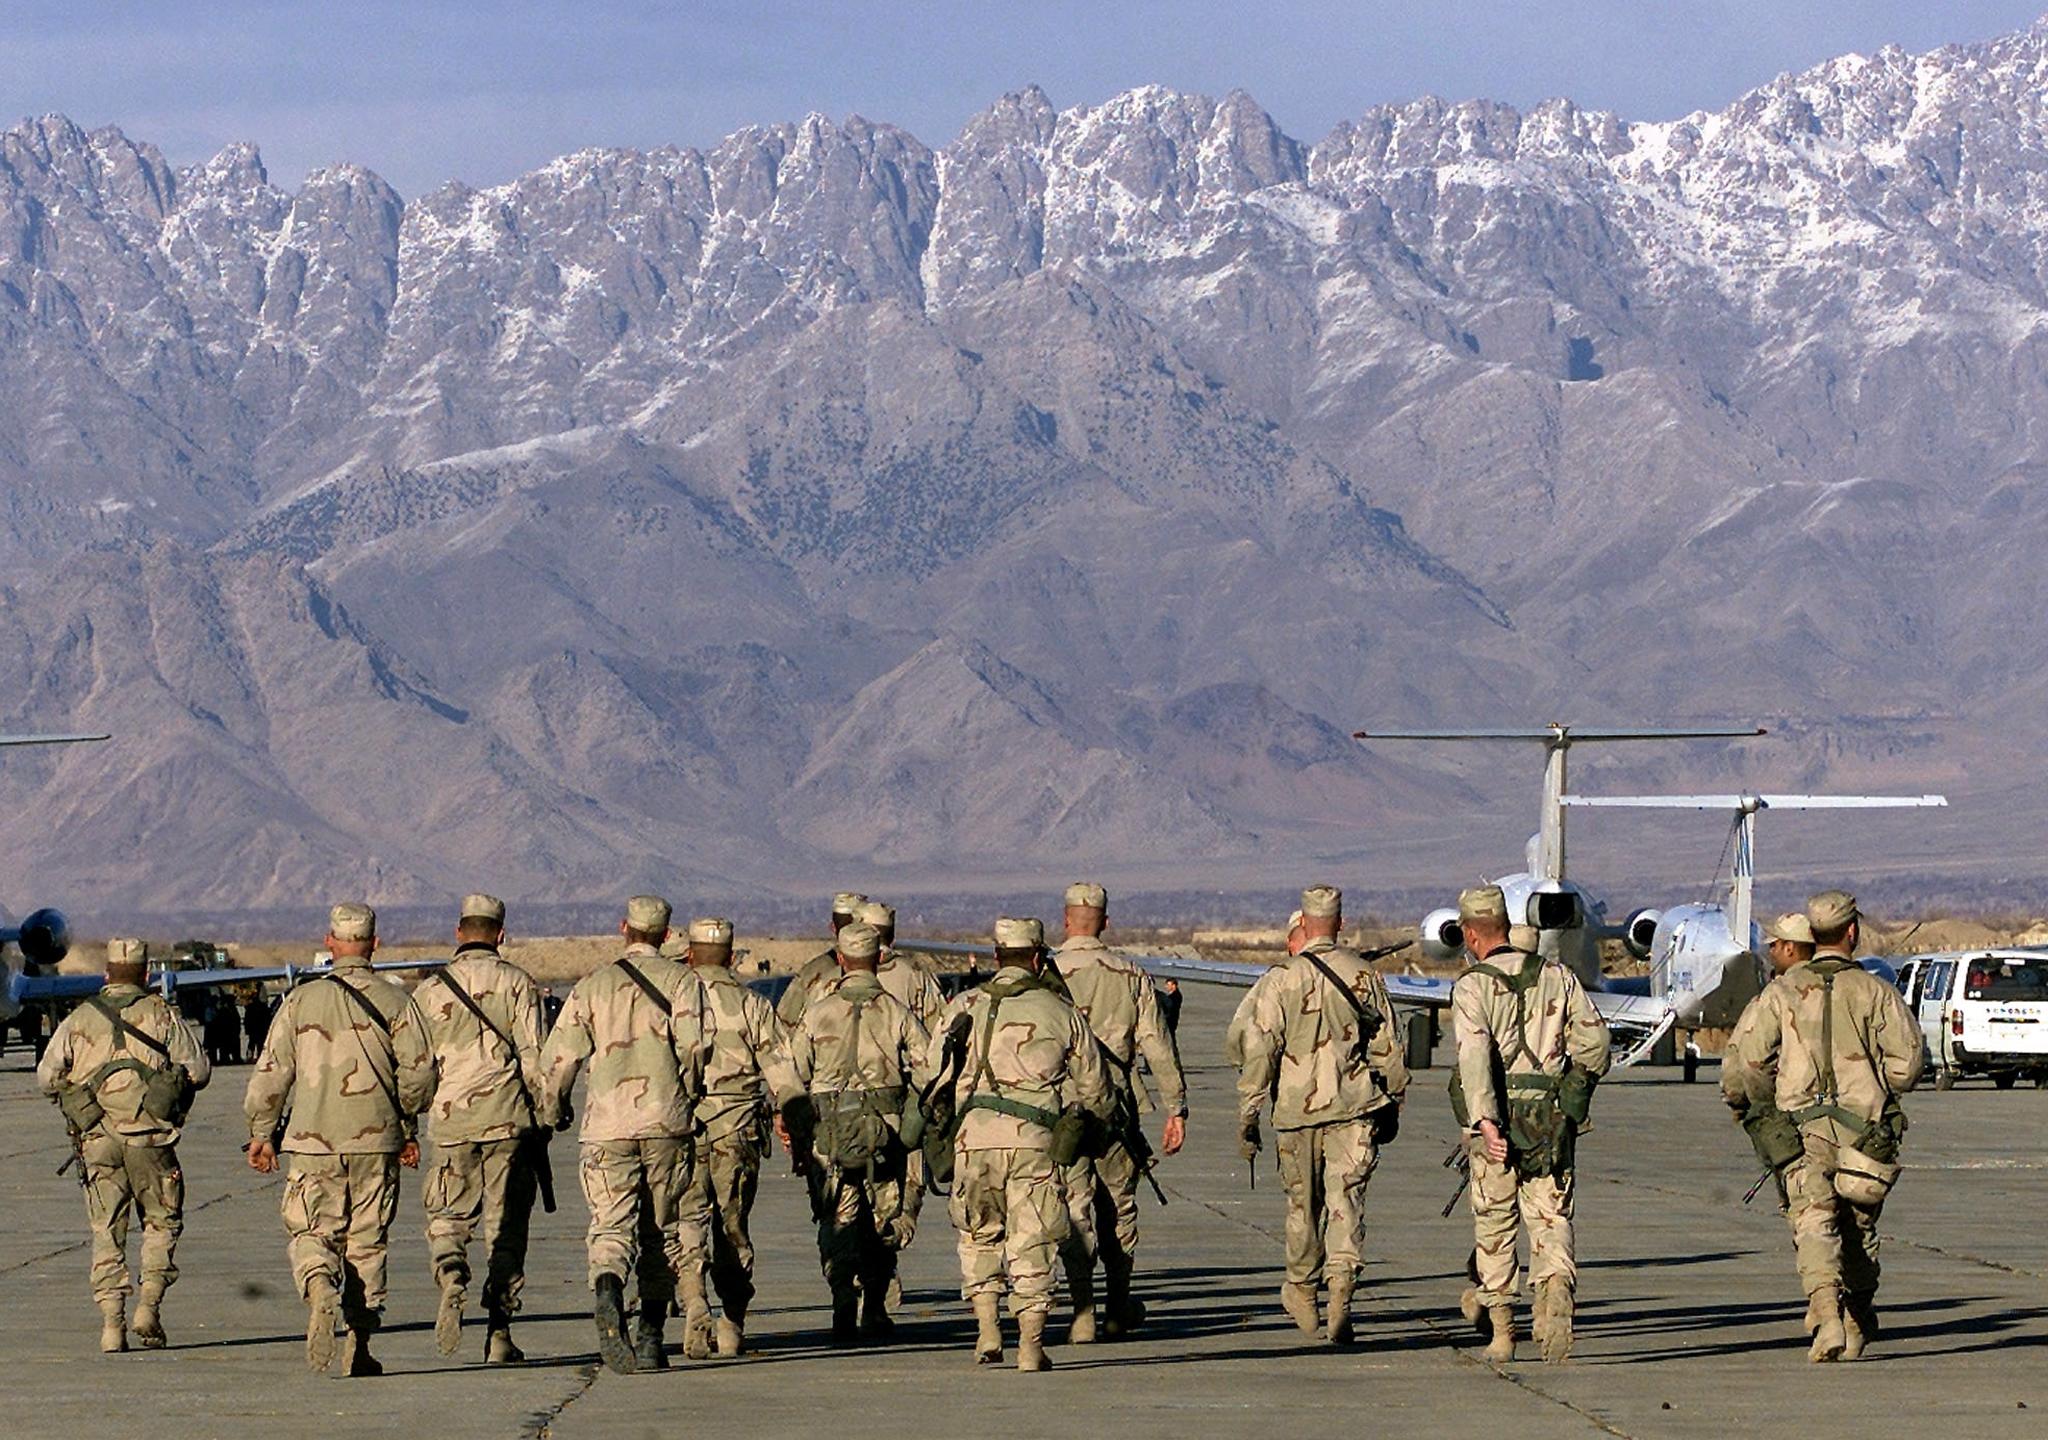 All US and NATO troops have left Bagram Air Base after 20 years in Afghanistan